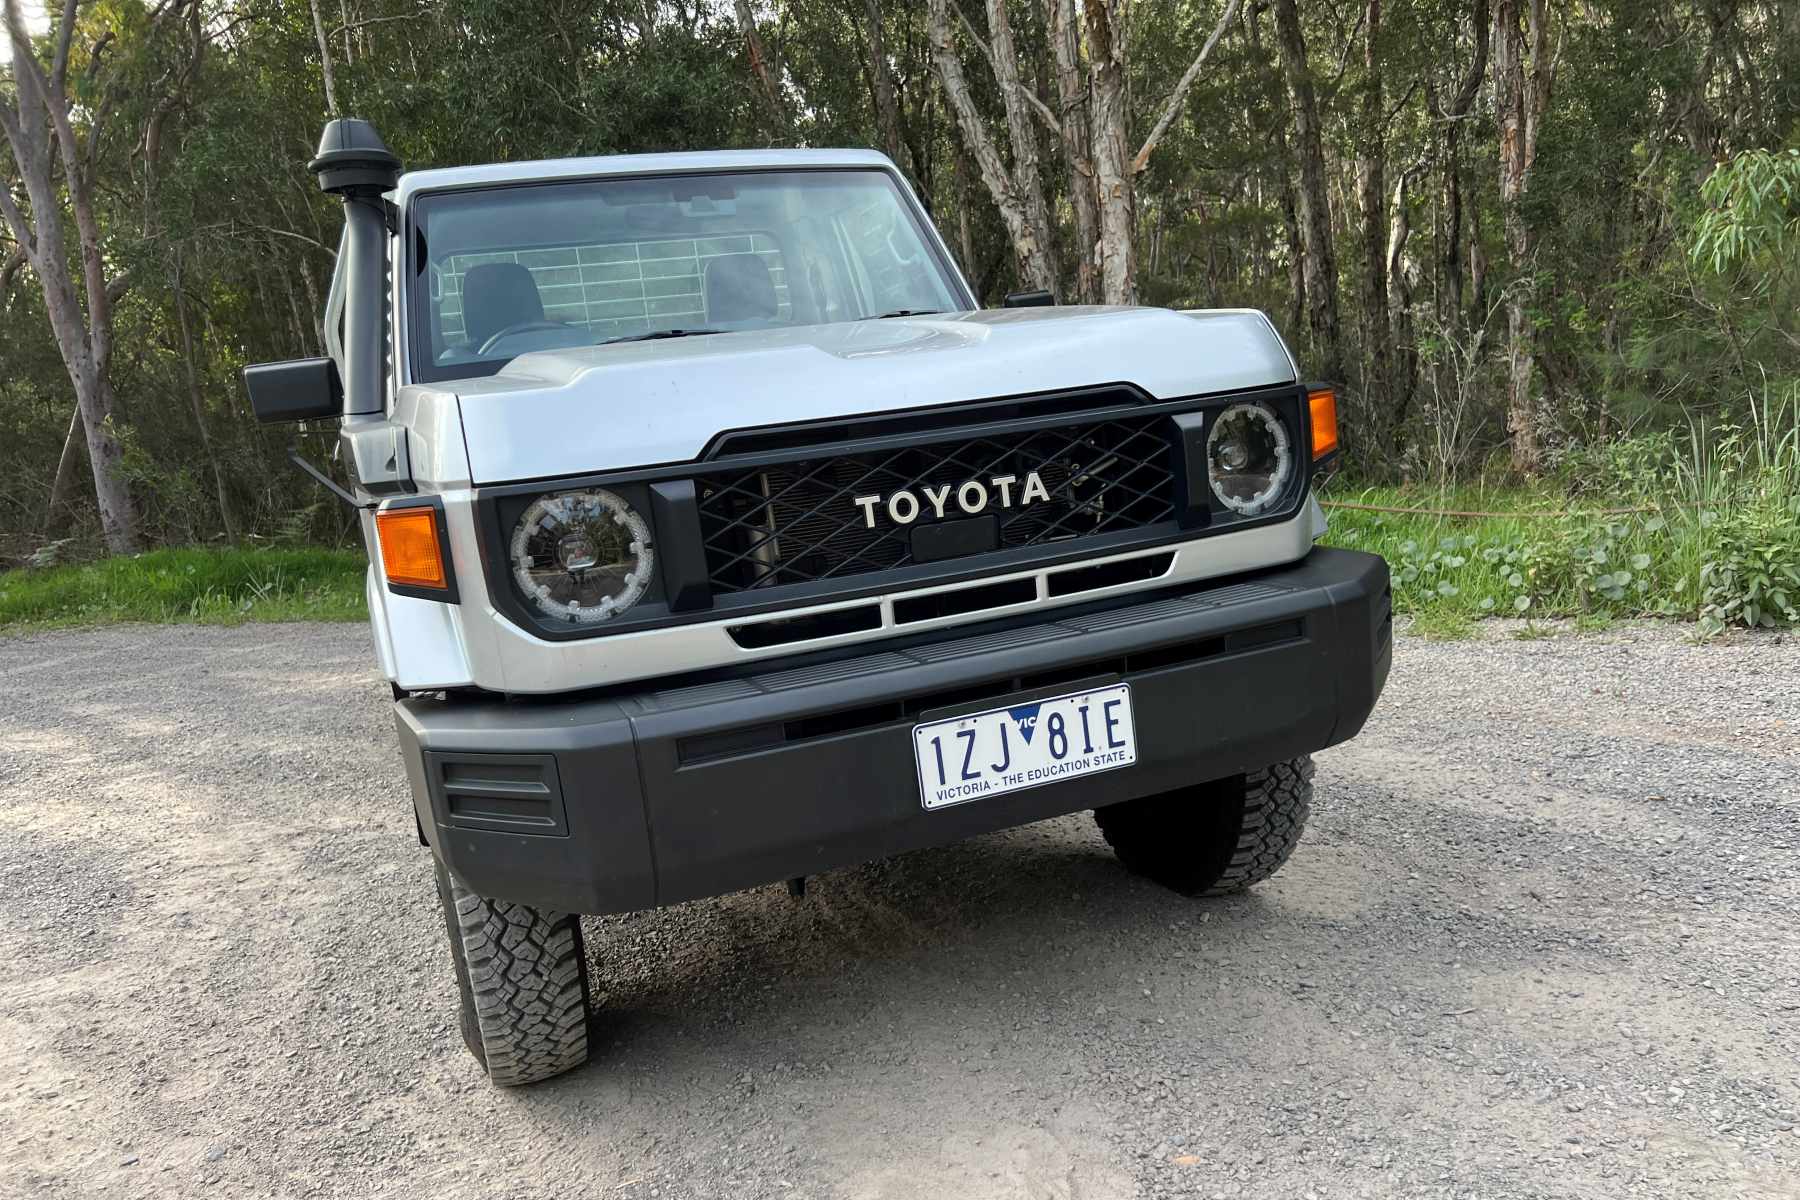 Toyota LandCruiser single cab chassis Ute front grill and bonnet1